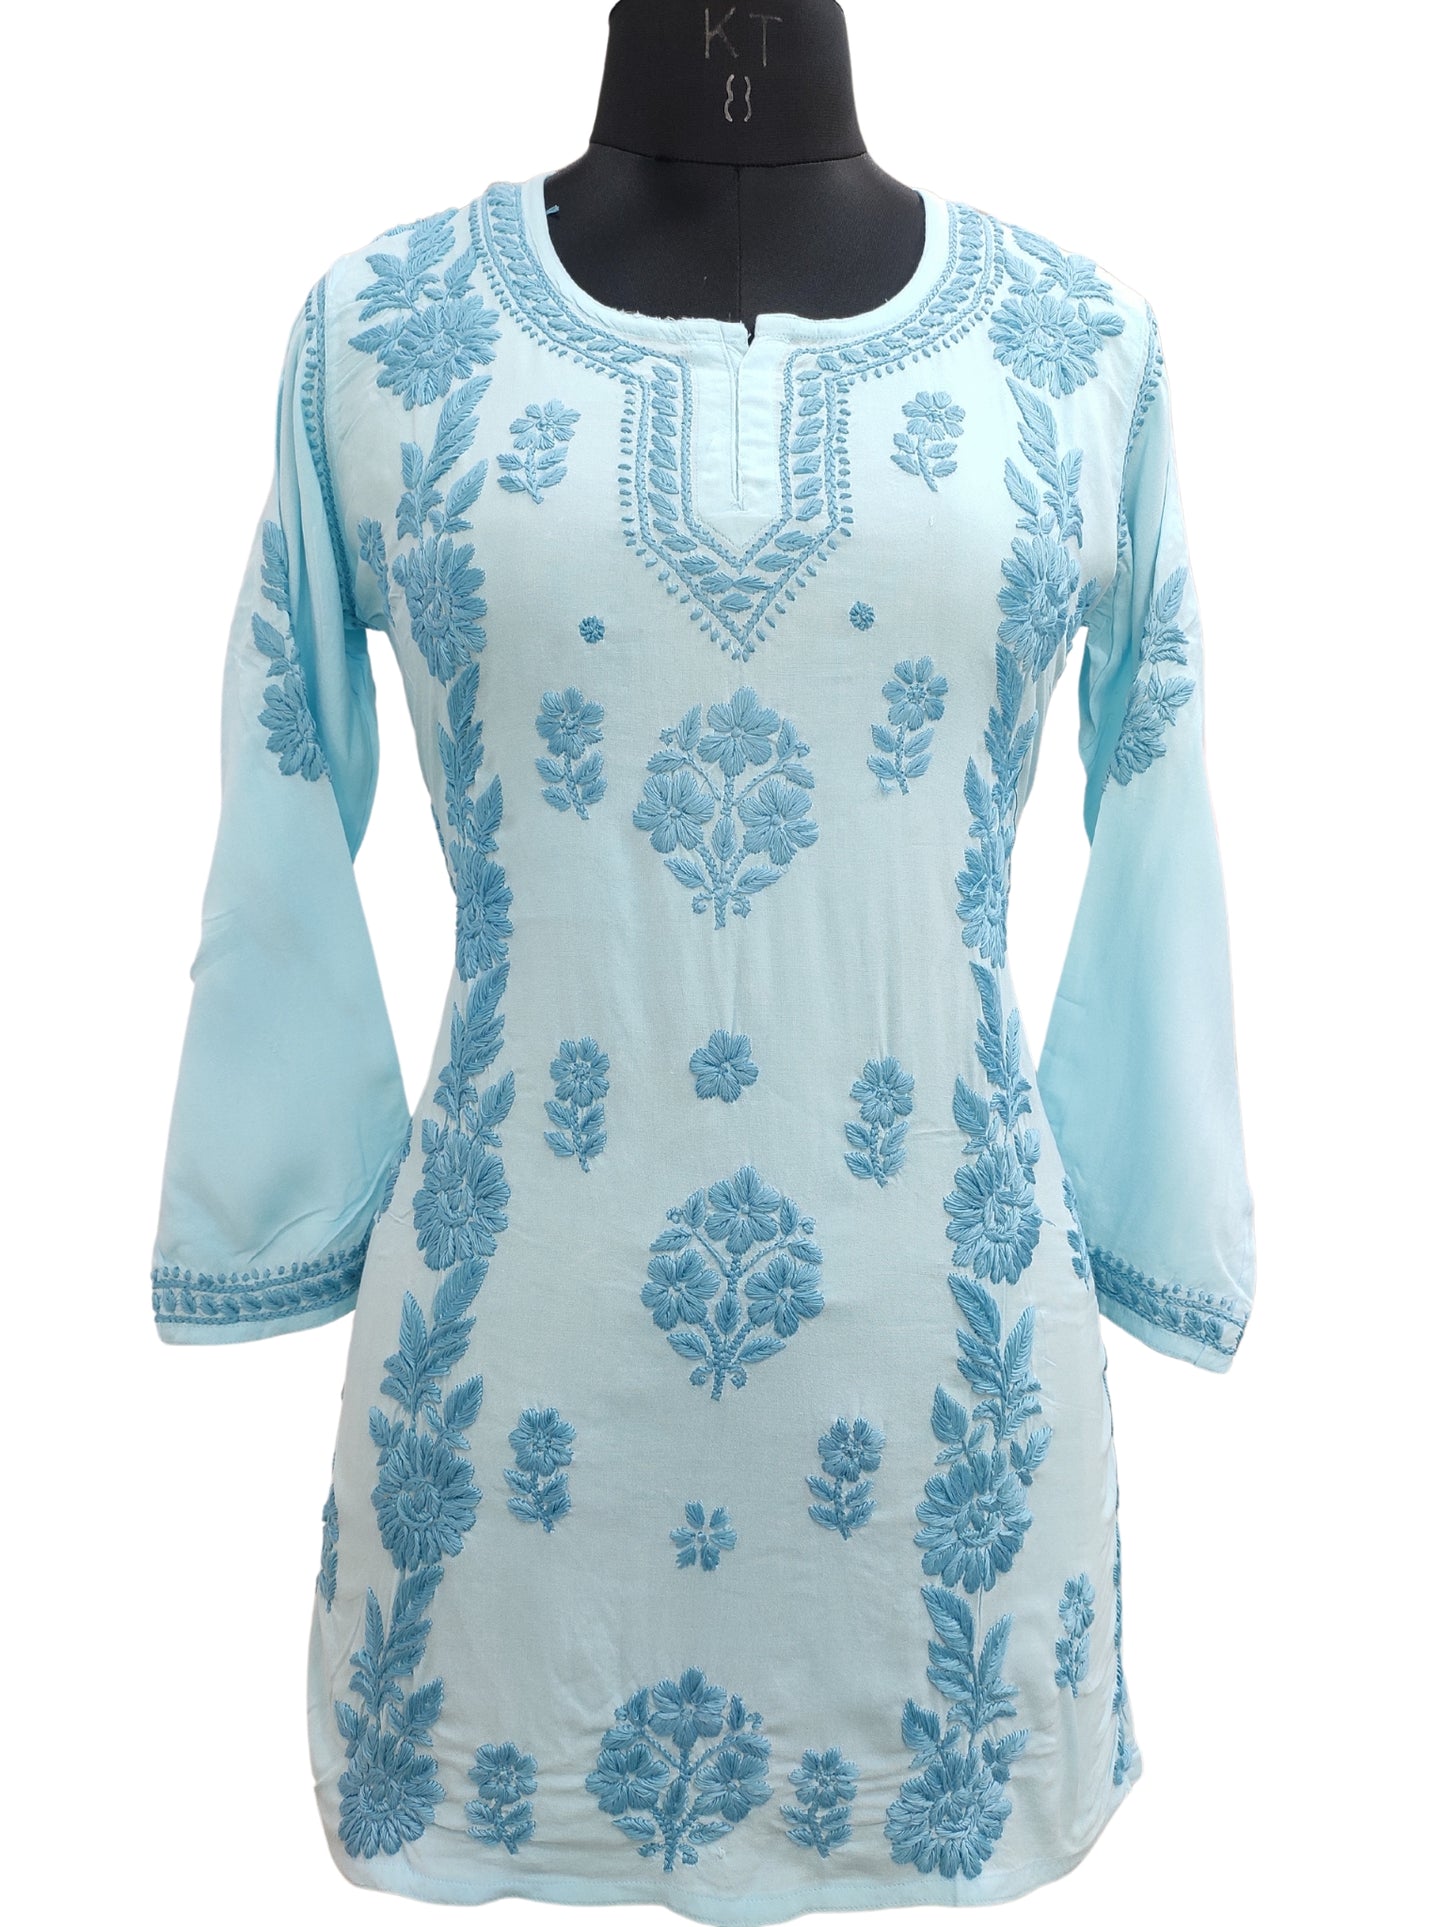 Shyamal Chikan Hand Embroidered Blue Soft Cotton Lucknowi Chikankari Short Top- S21375